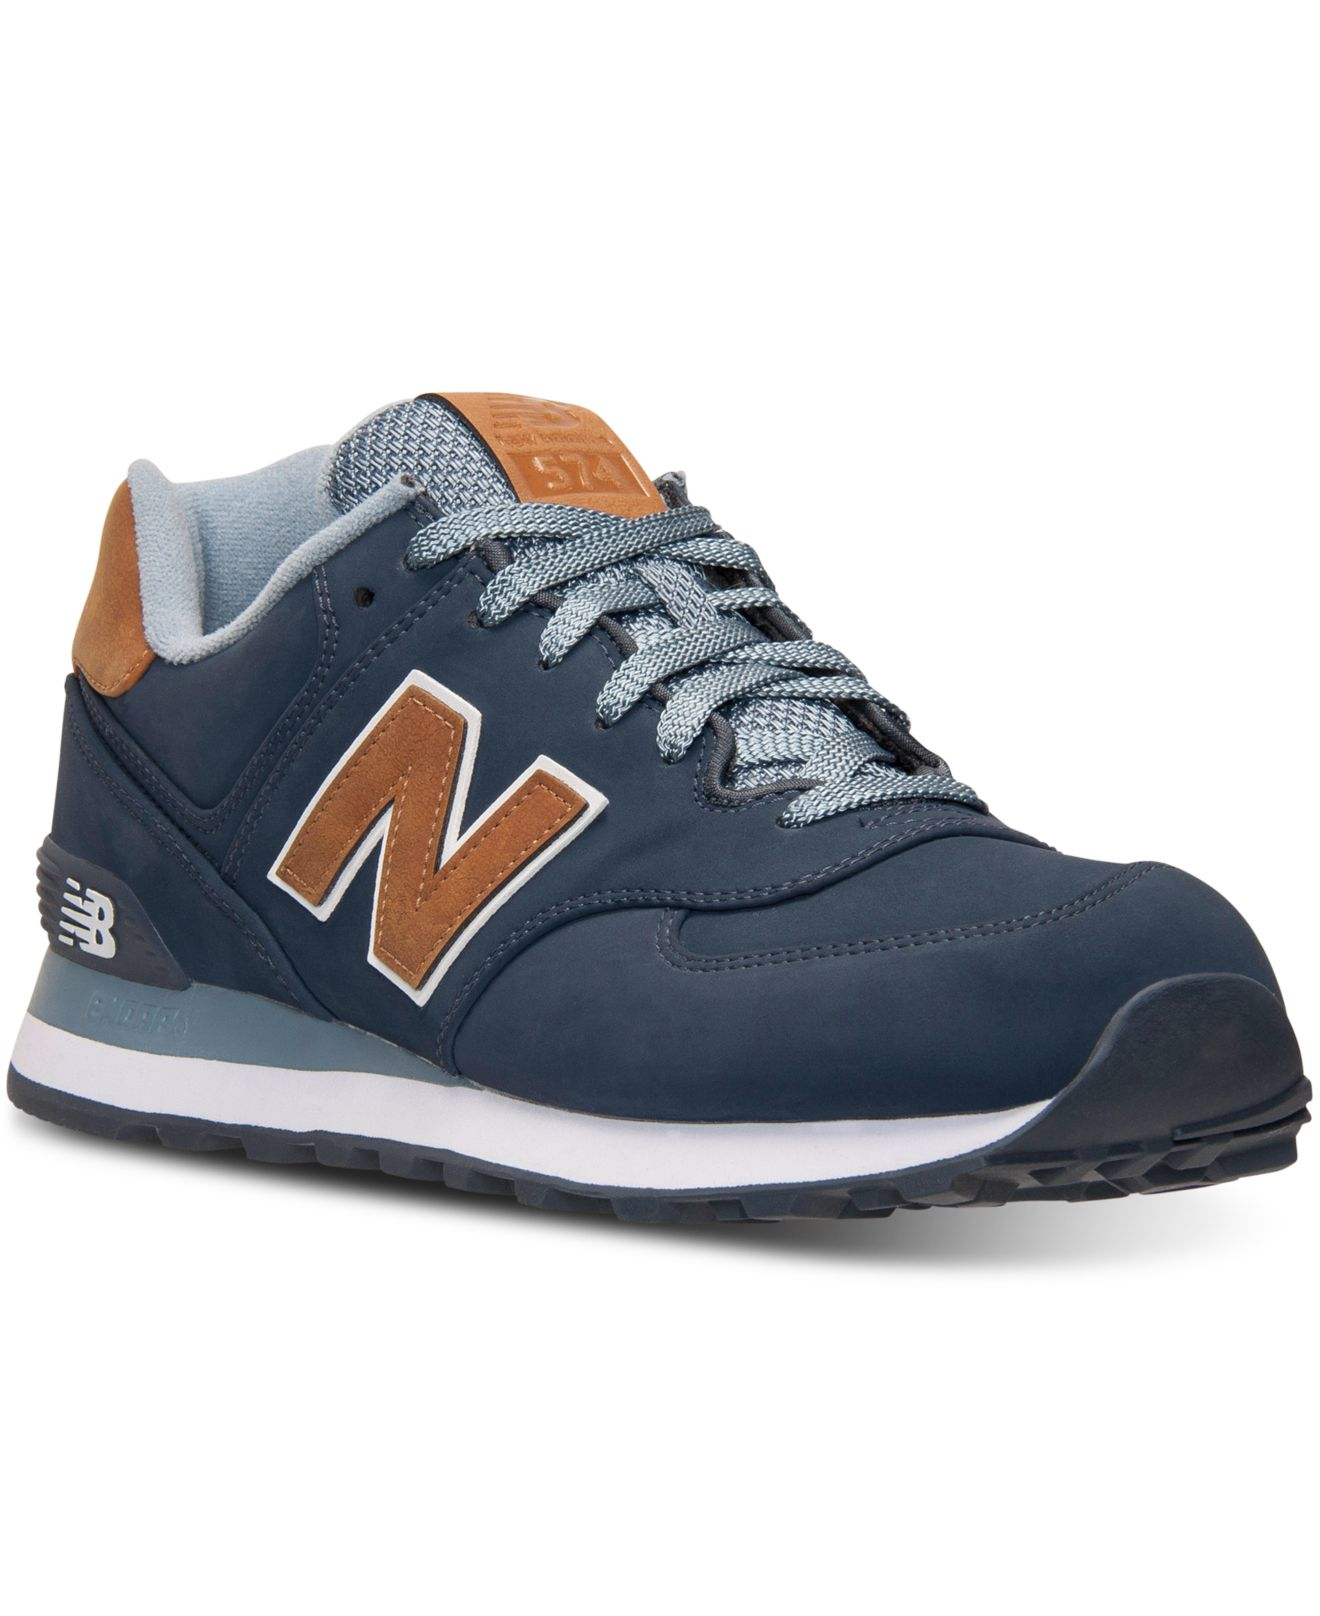 Lyst - New Balance Men's 574 Casual Sneakers From Finish Line in Gray for Men